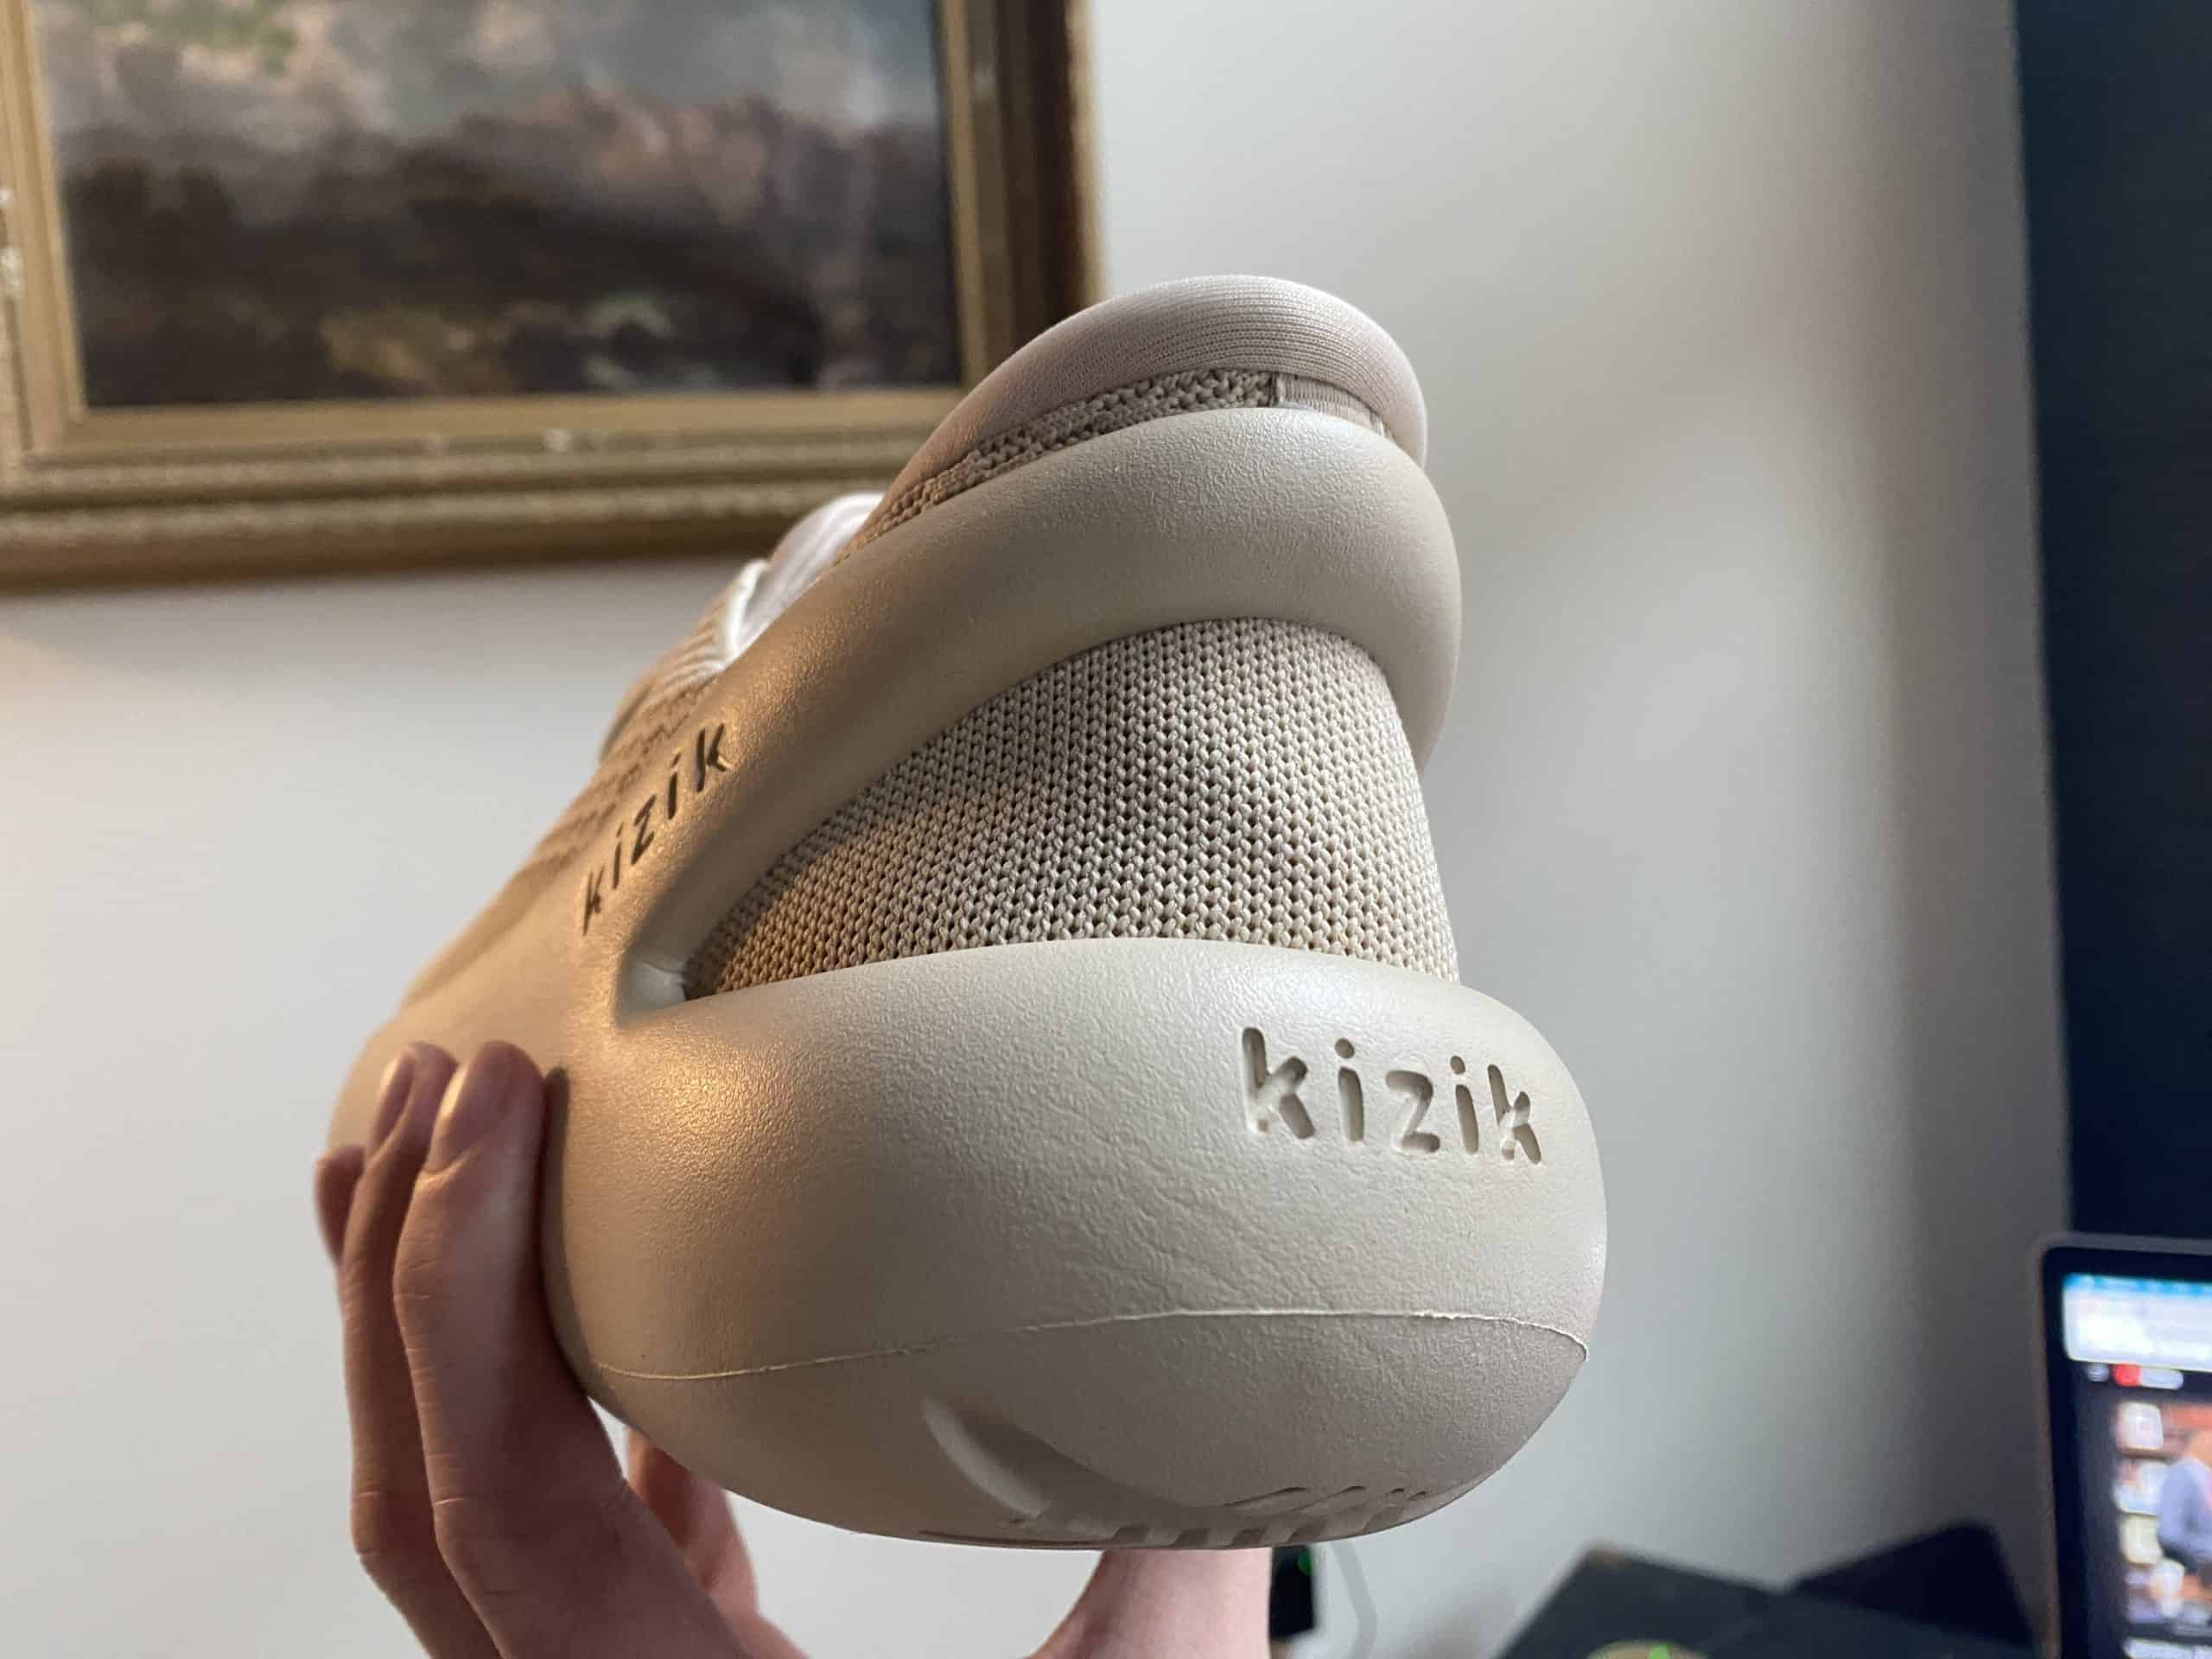 After repeated wear, my Kizik outsoles showed no visible signs of the repeated compression required to put them on.